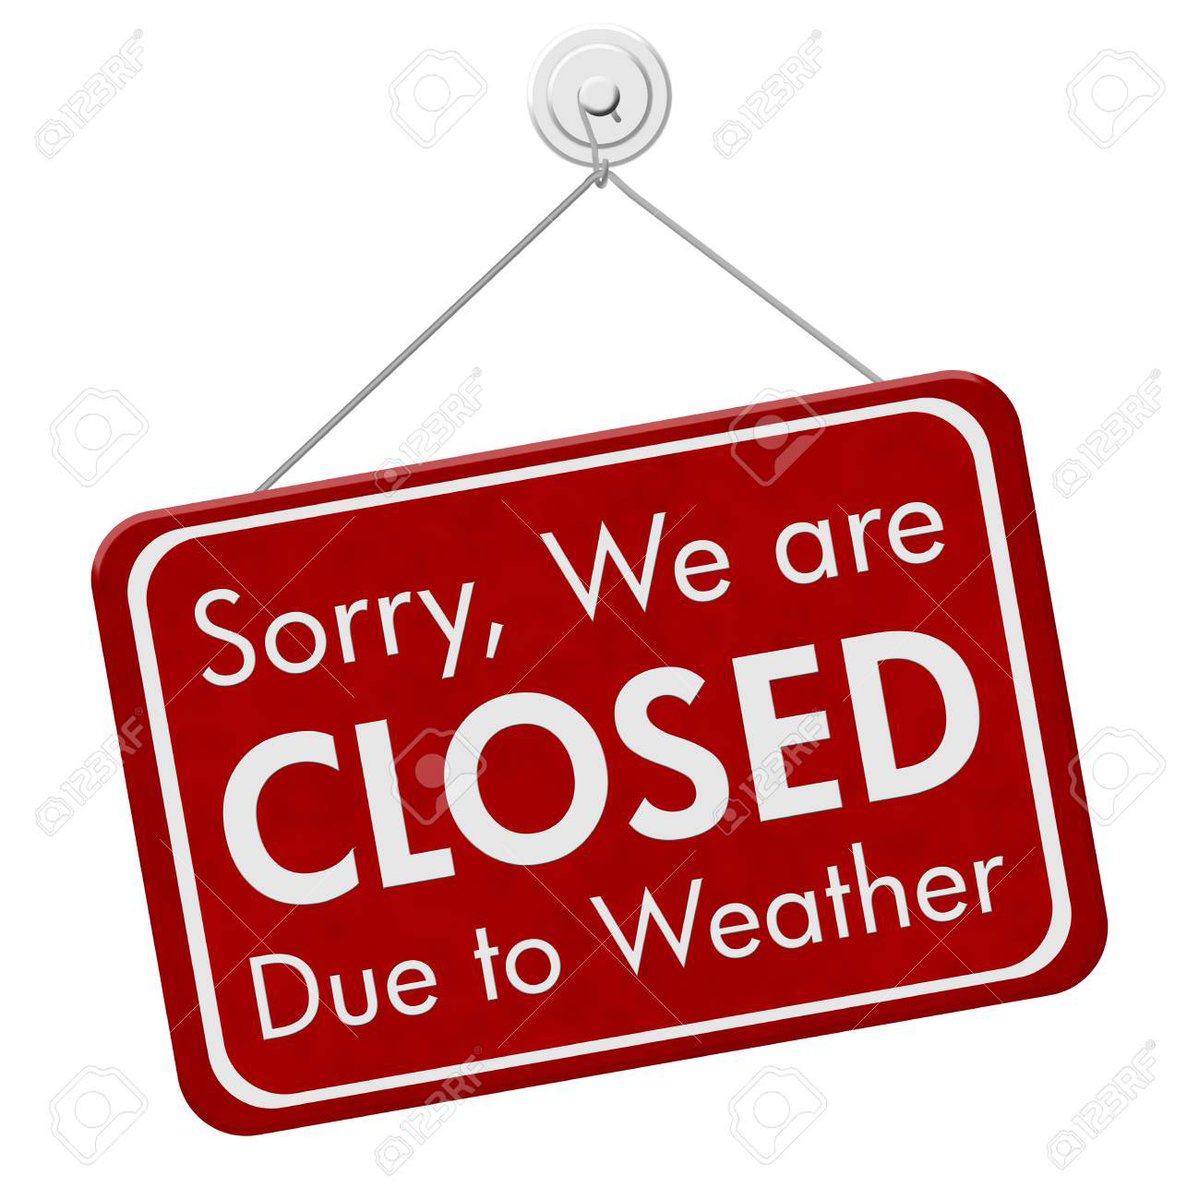 Good Morning All! Unfortunately Cirencester Charter Market is CANCELLED TODAY, Monday 13th November due to weather conditions. The market will be back this Friday as normal. Apologies for any inconvenience